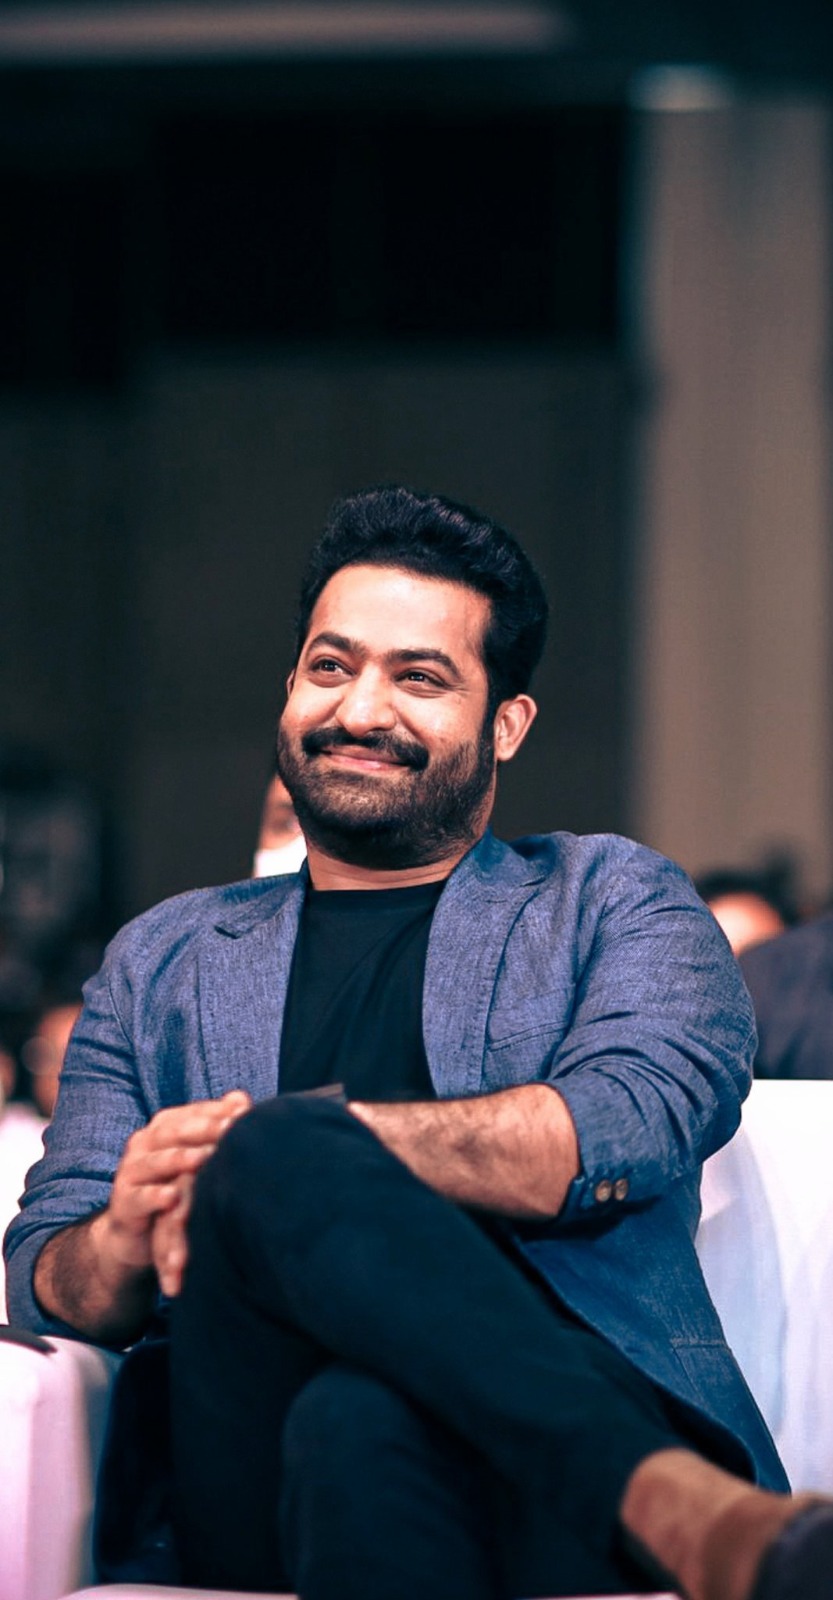 Man of Masses NTR Jr sets a new record with more than 25 million mentions on Twitter in a year’s time